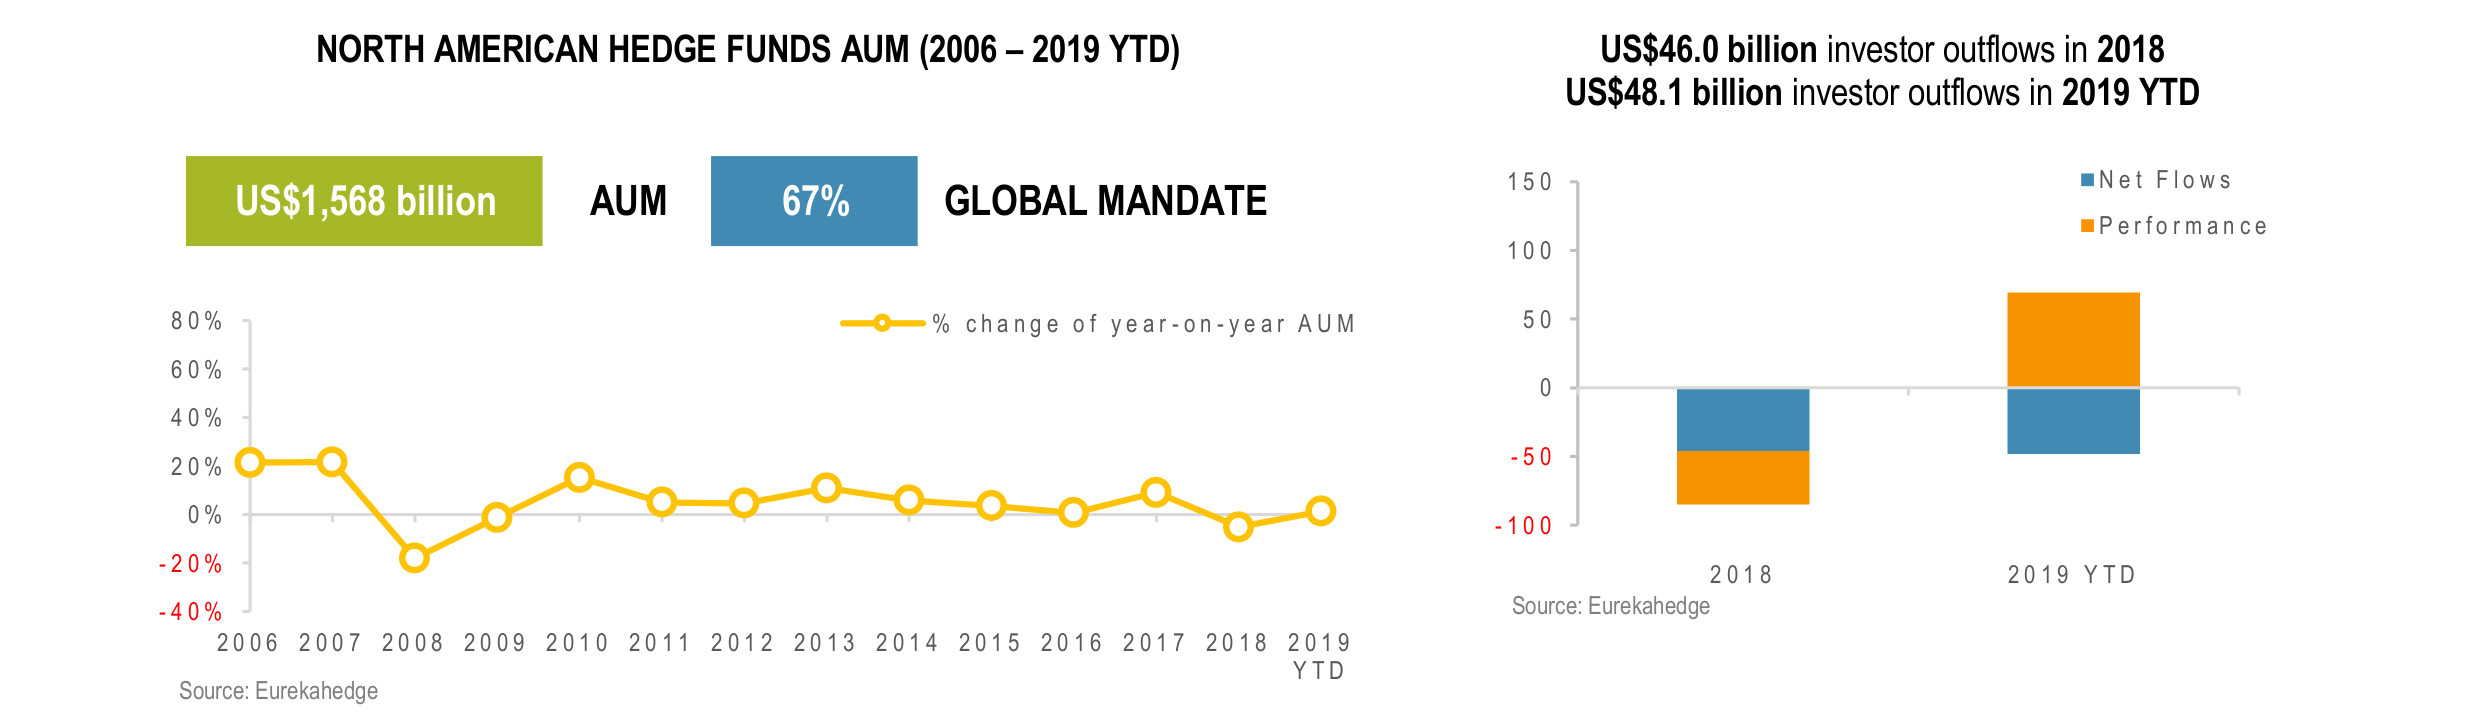 North American Hedge Funds Infographic October 2019 - AUM